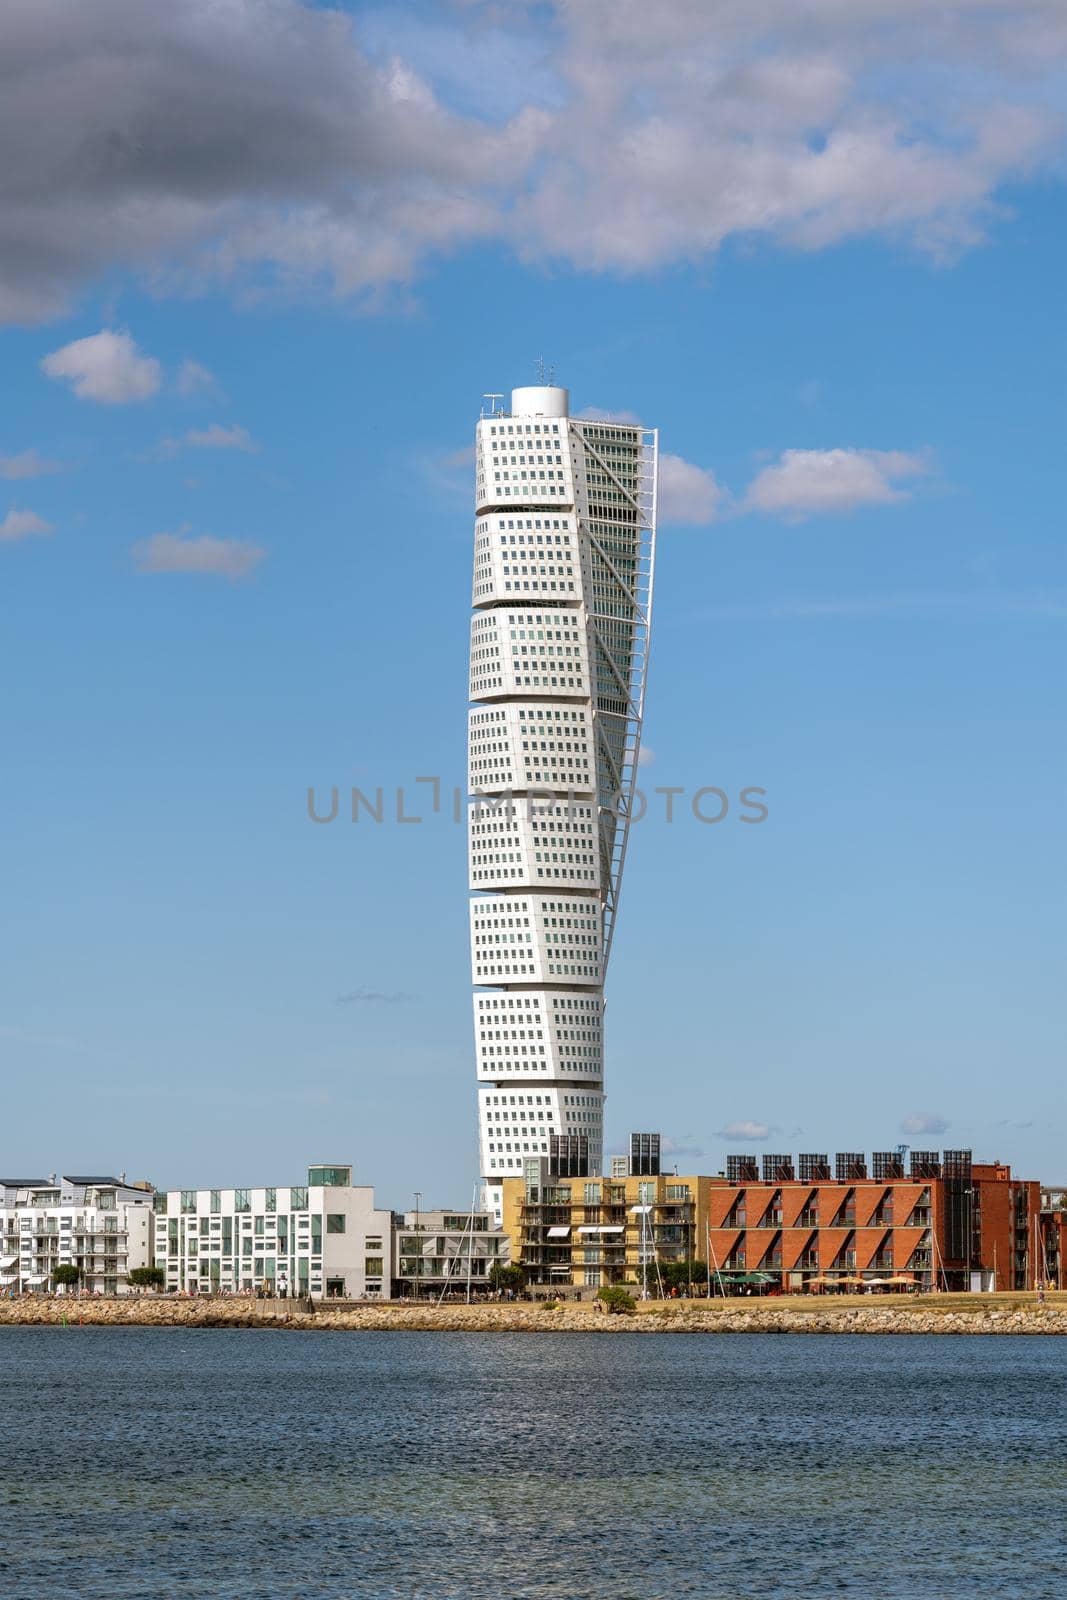 The iconic Turning Torso in Malmo, Sweden, on a sunny day